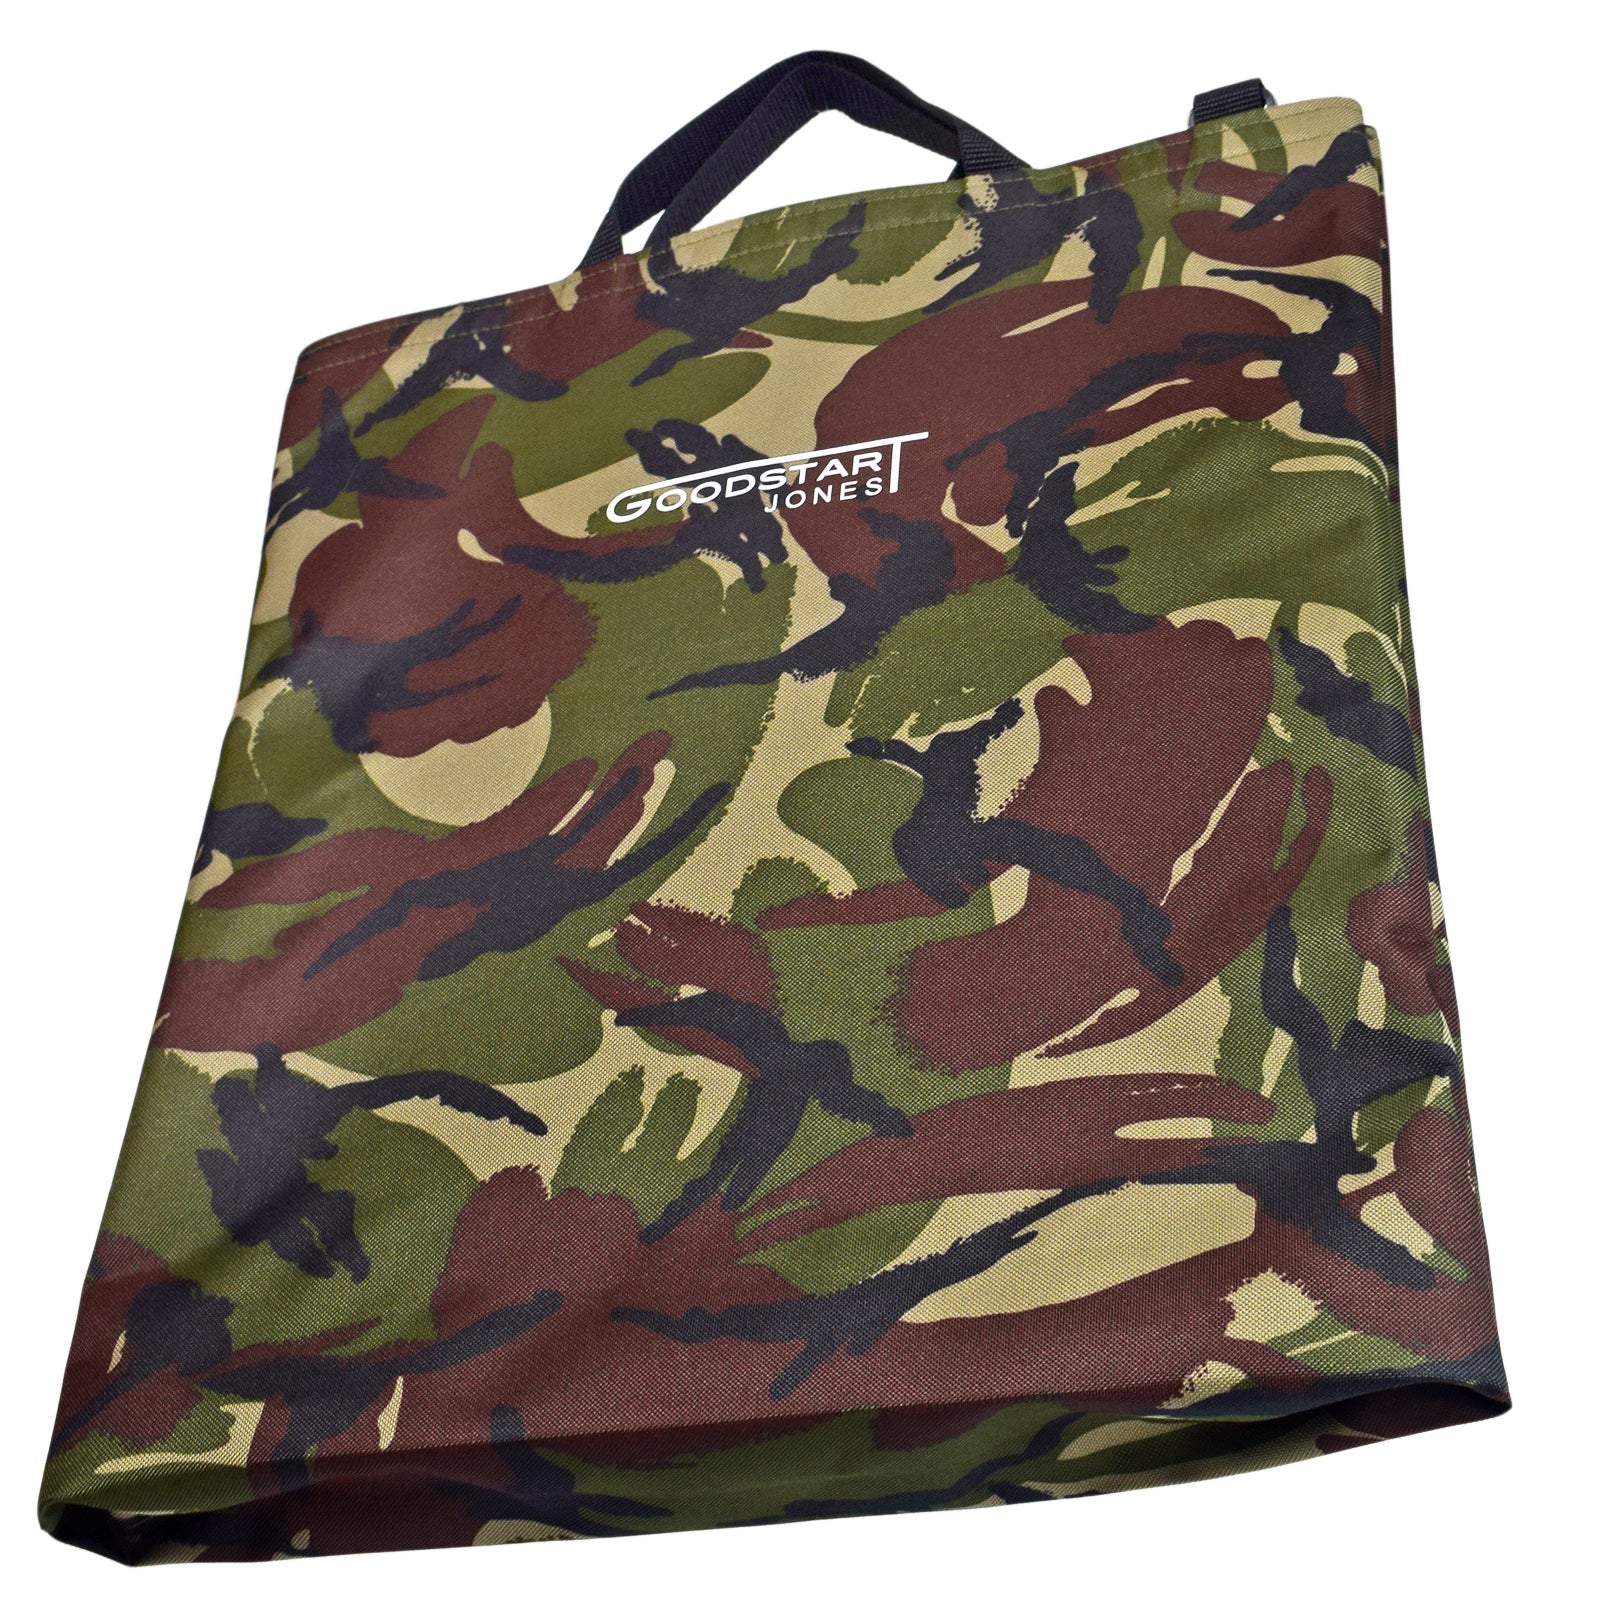 Tote Bag in green camouflage print 